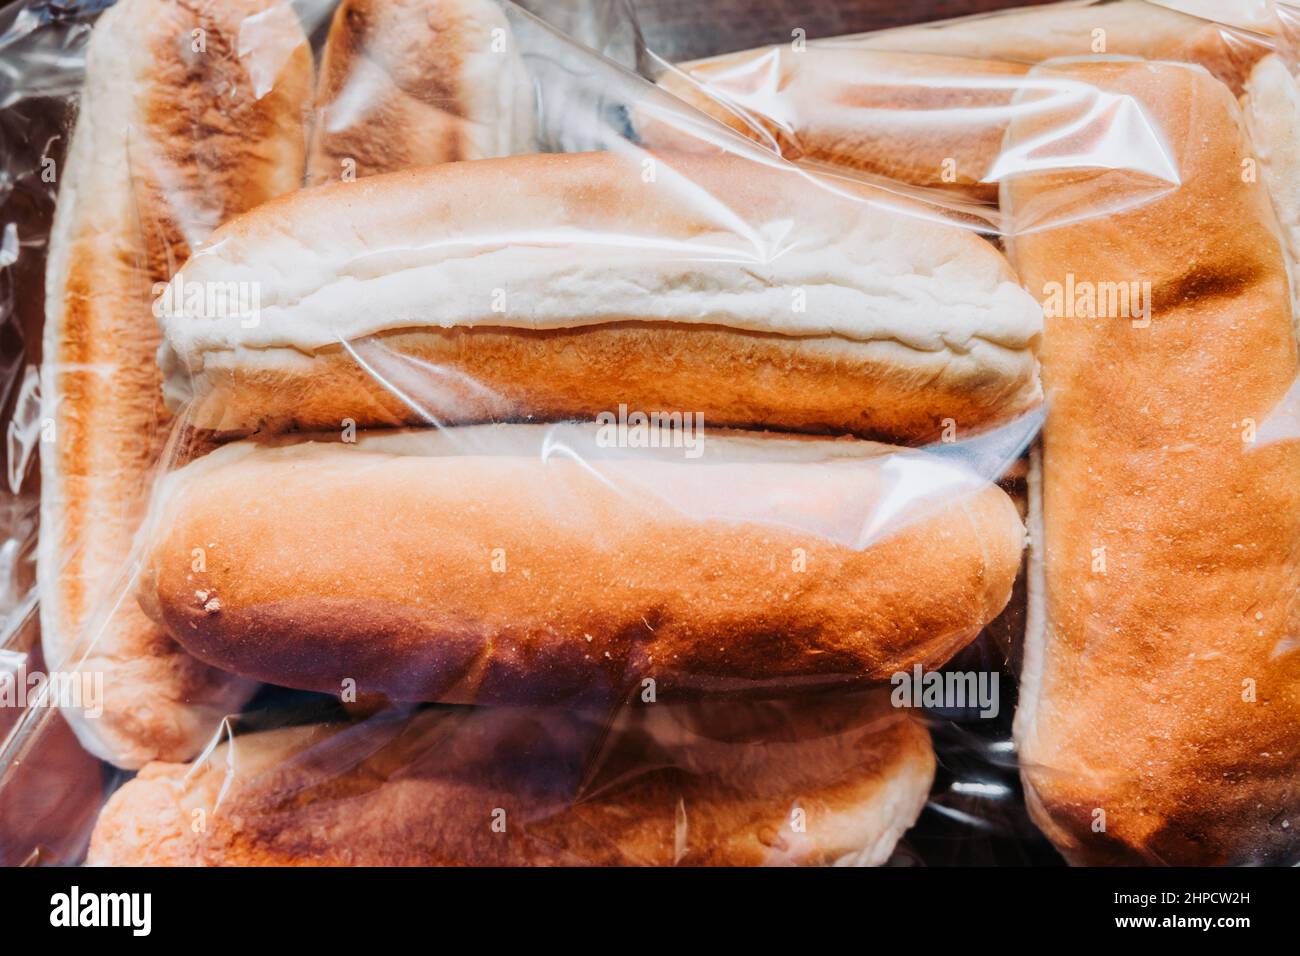 fresh hot dog buns packed in a plastic bag Stock Photo